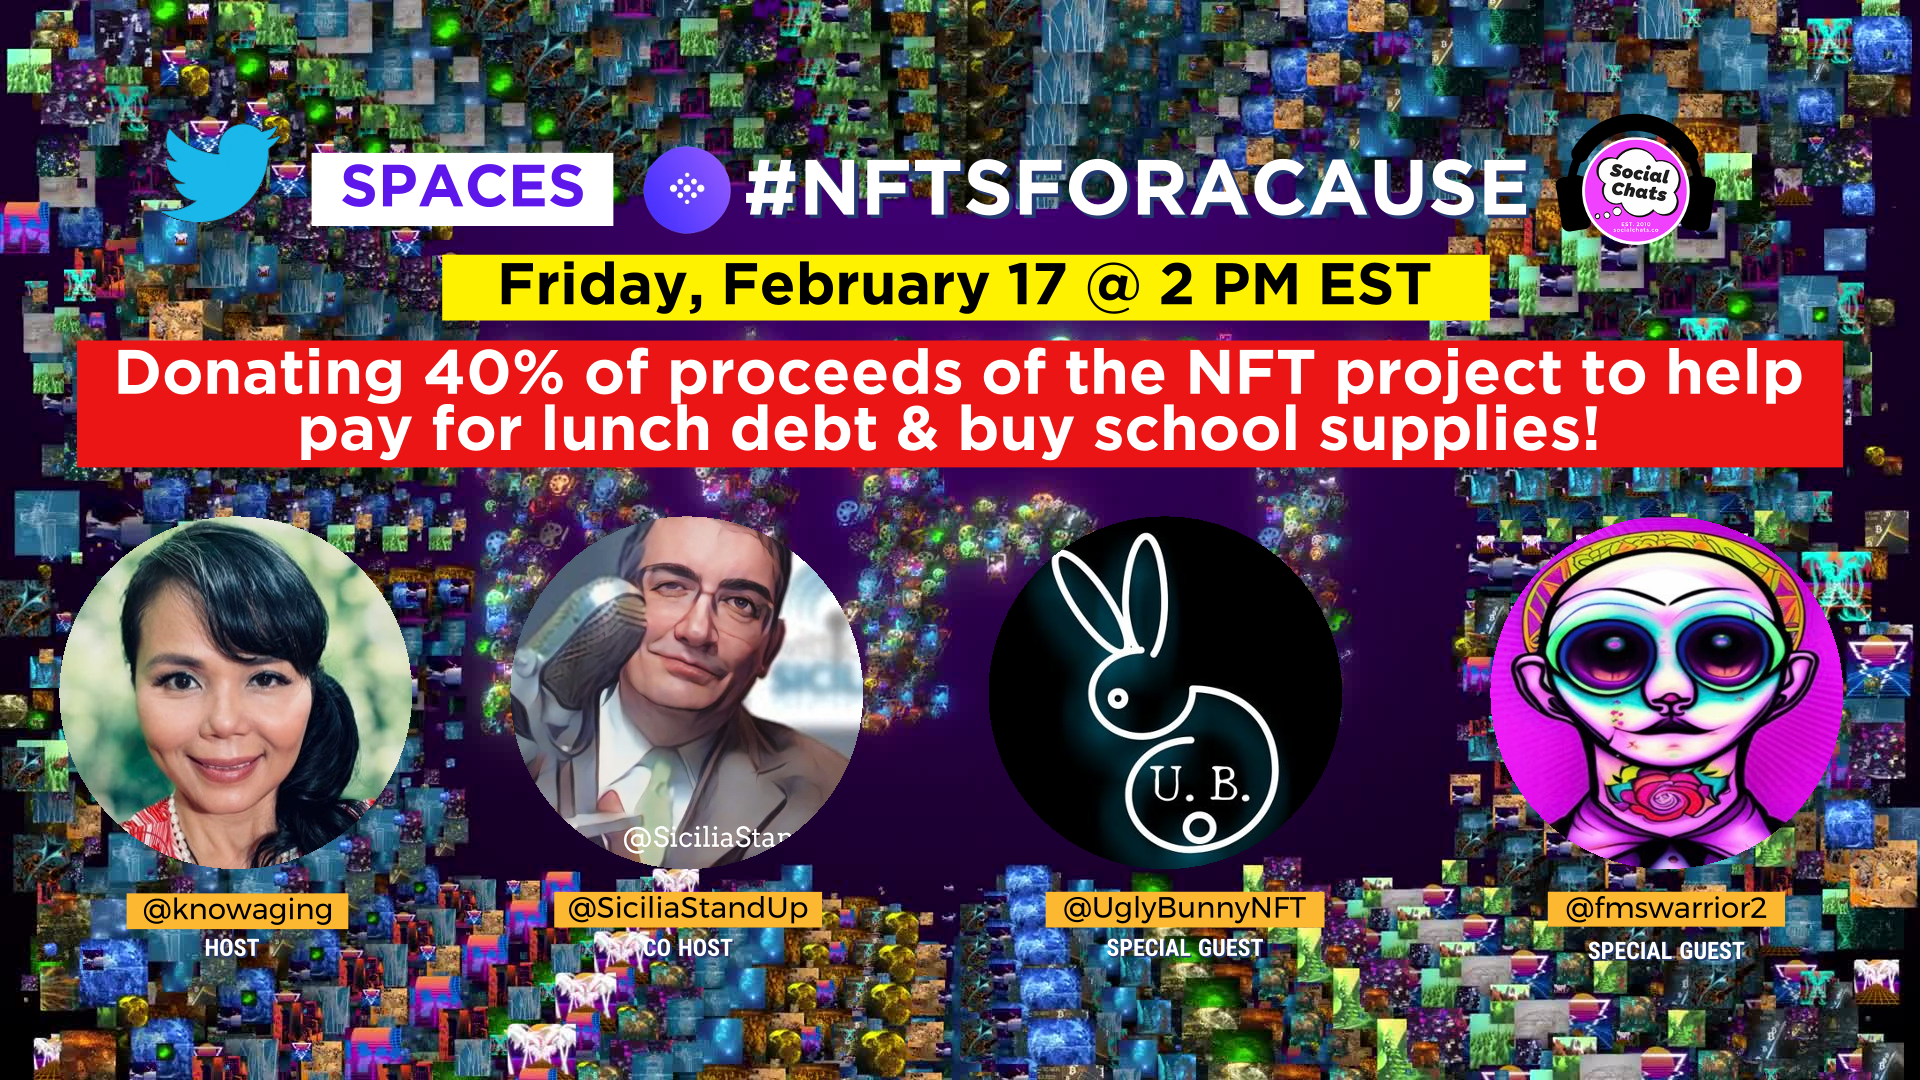 Join @SiciliaStandUp & @knowaging #NFTsForACause v/ @TwitterSpaces! Friday, February 17th at 6 PM EST. Chat w/ @UglyBunnyNFT and her team member @fmswarrior2 about donating 40% of NFT project to help pay lunch debt & buy school supplies!